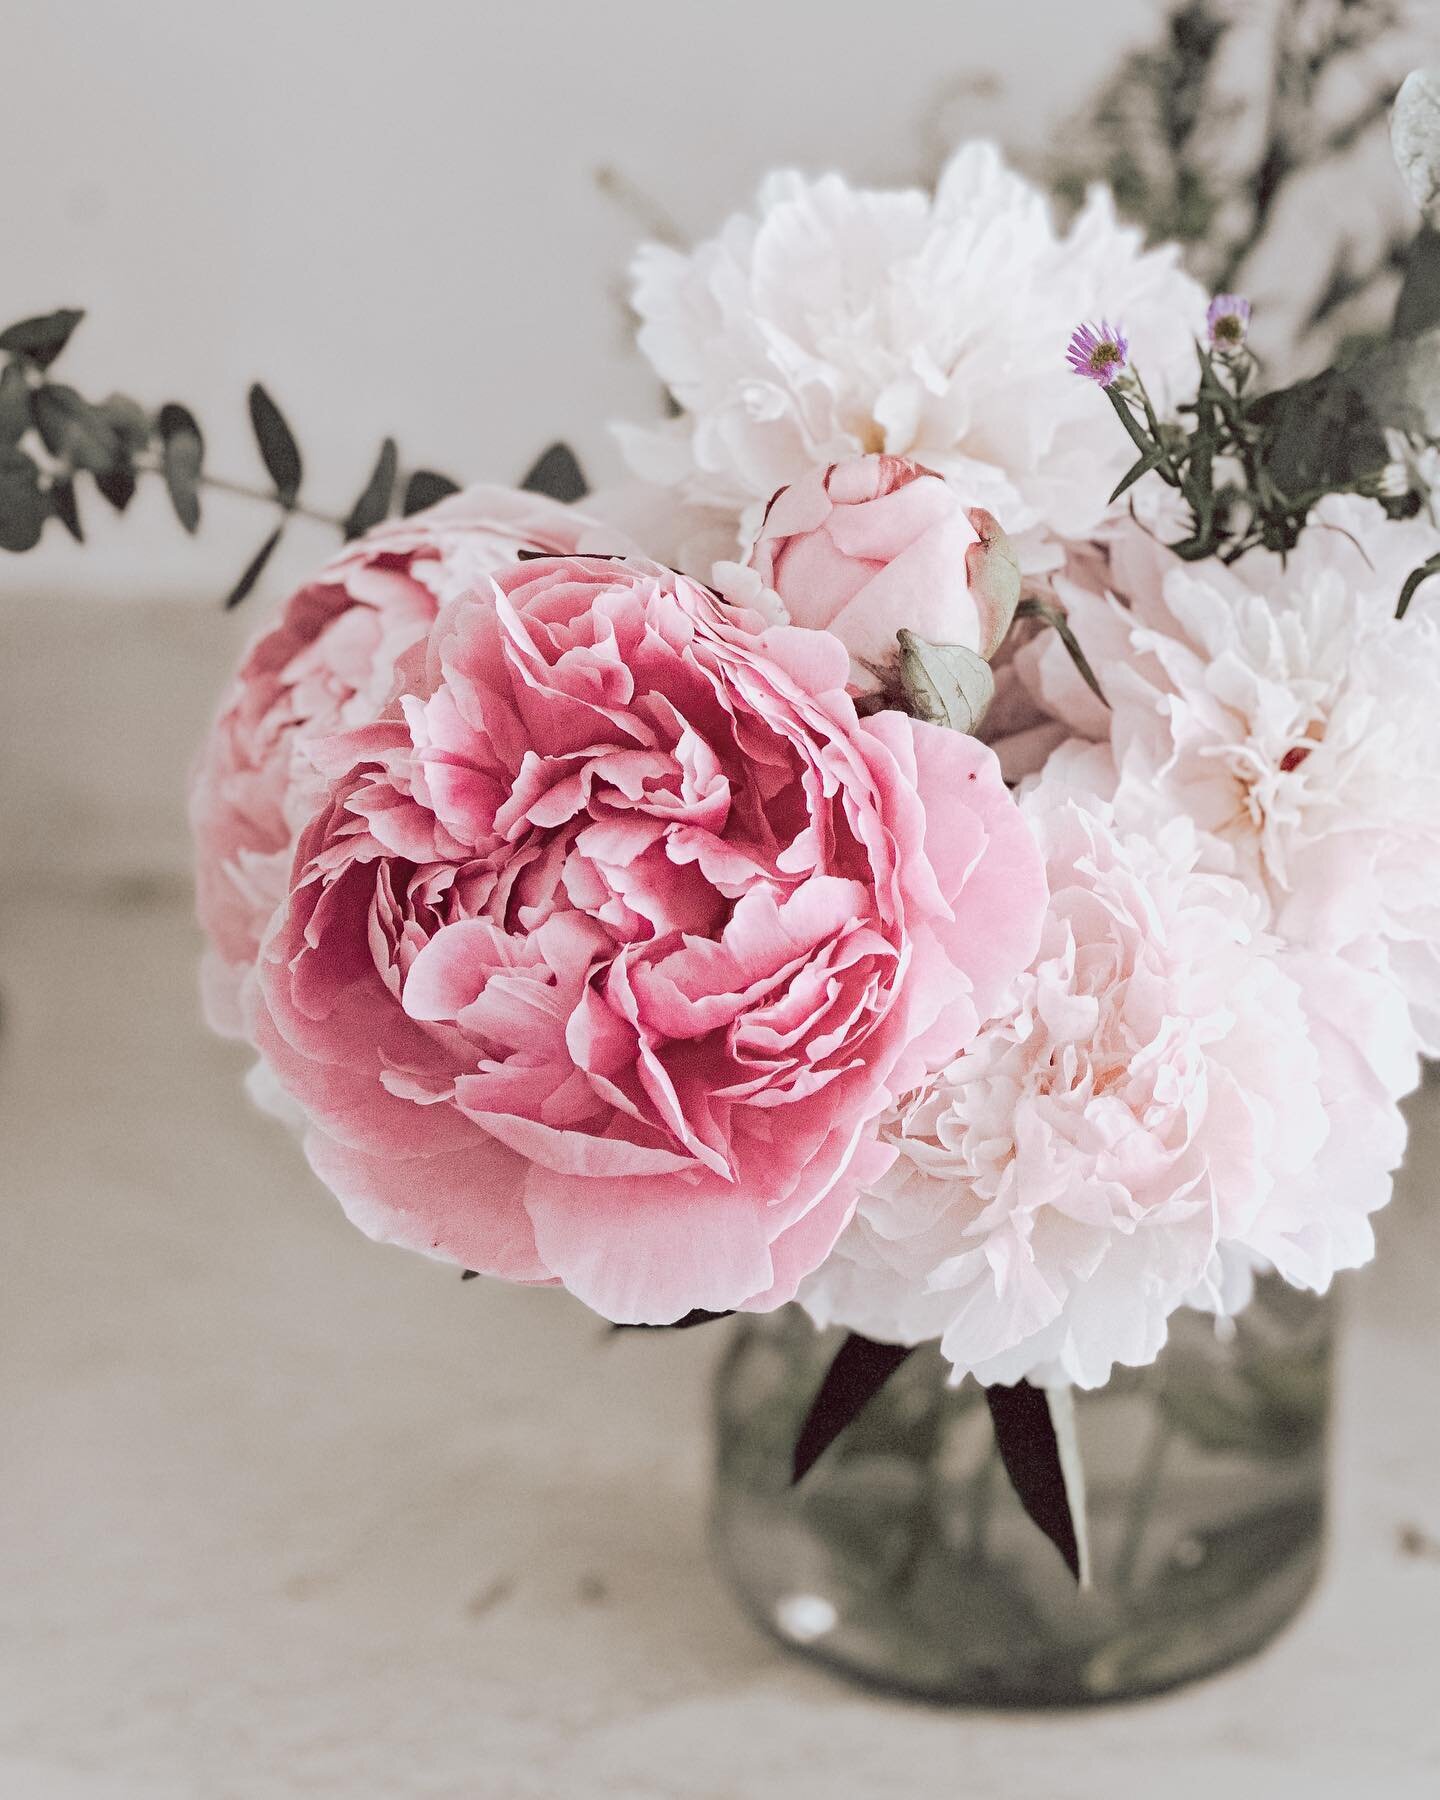 &ldquo;And the day came when the risk it took to remain tight in a bud was more painful than the risk it took to blossom.&rdquo;

~ Anais Nin

Enjoying the last of peony season, flowers bring so much joy and beauty to a space. What are your favourite